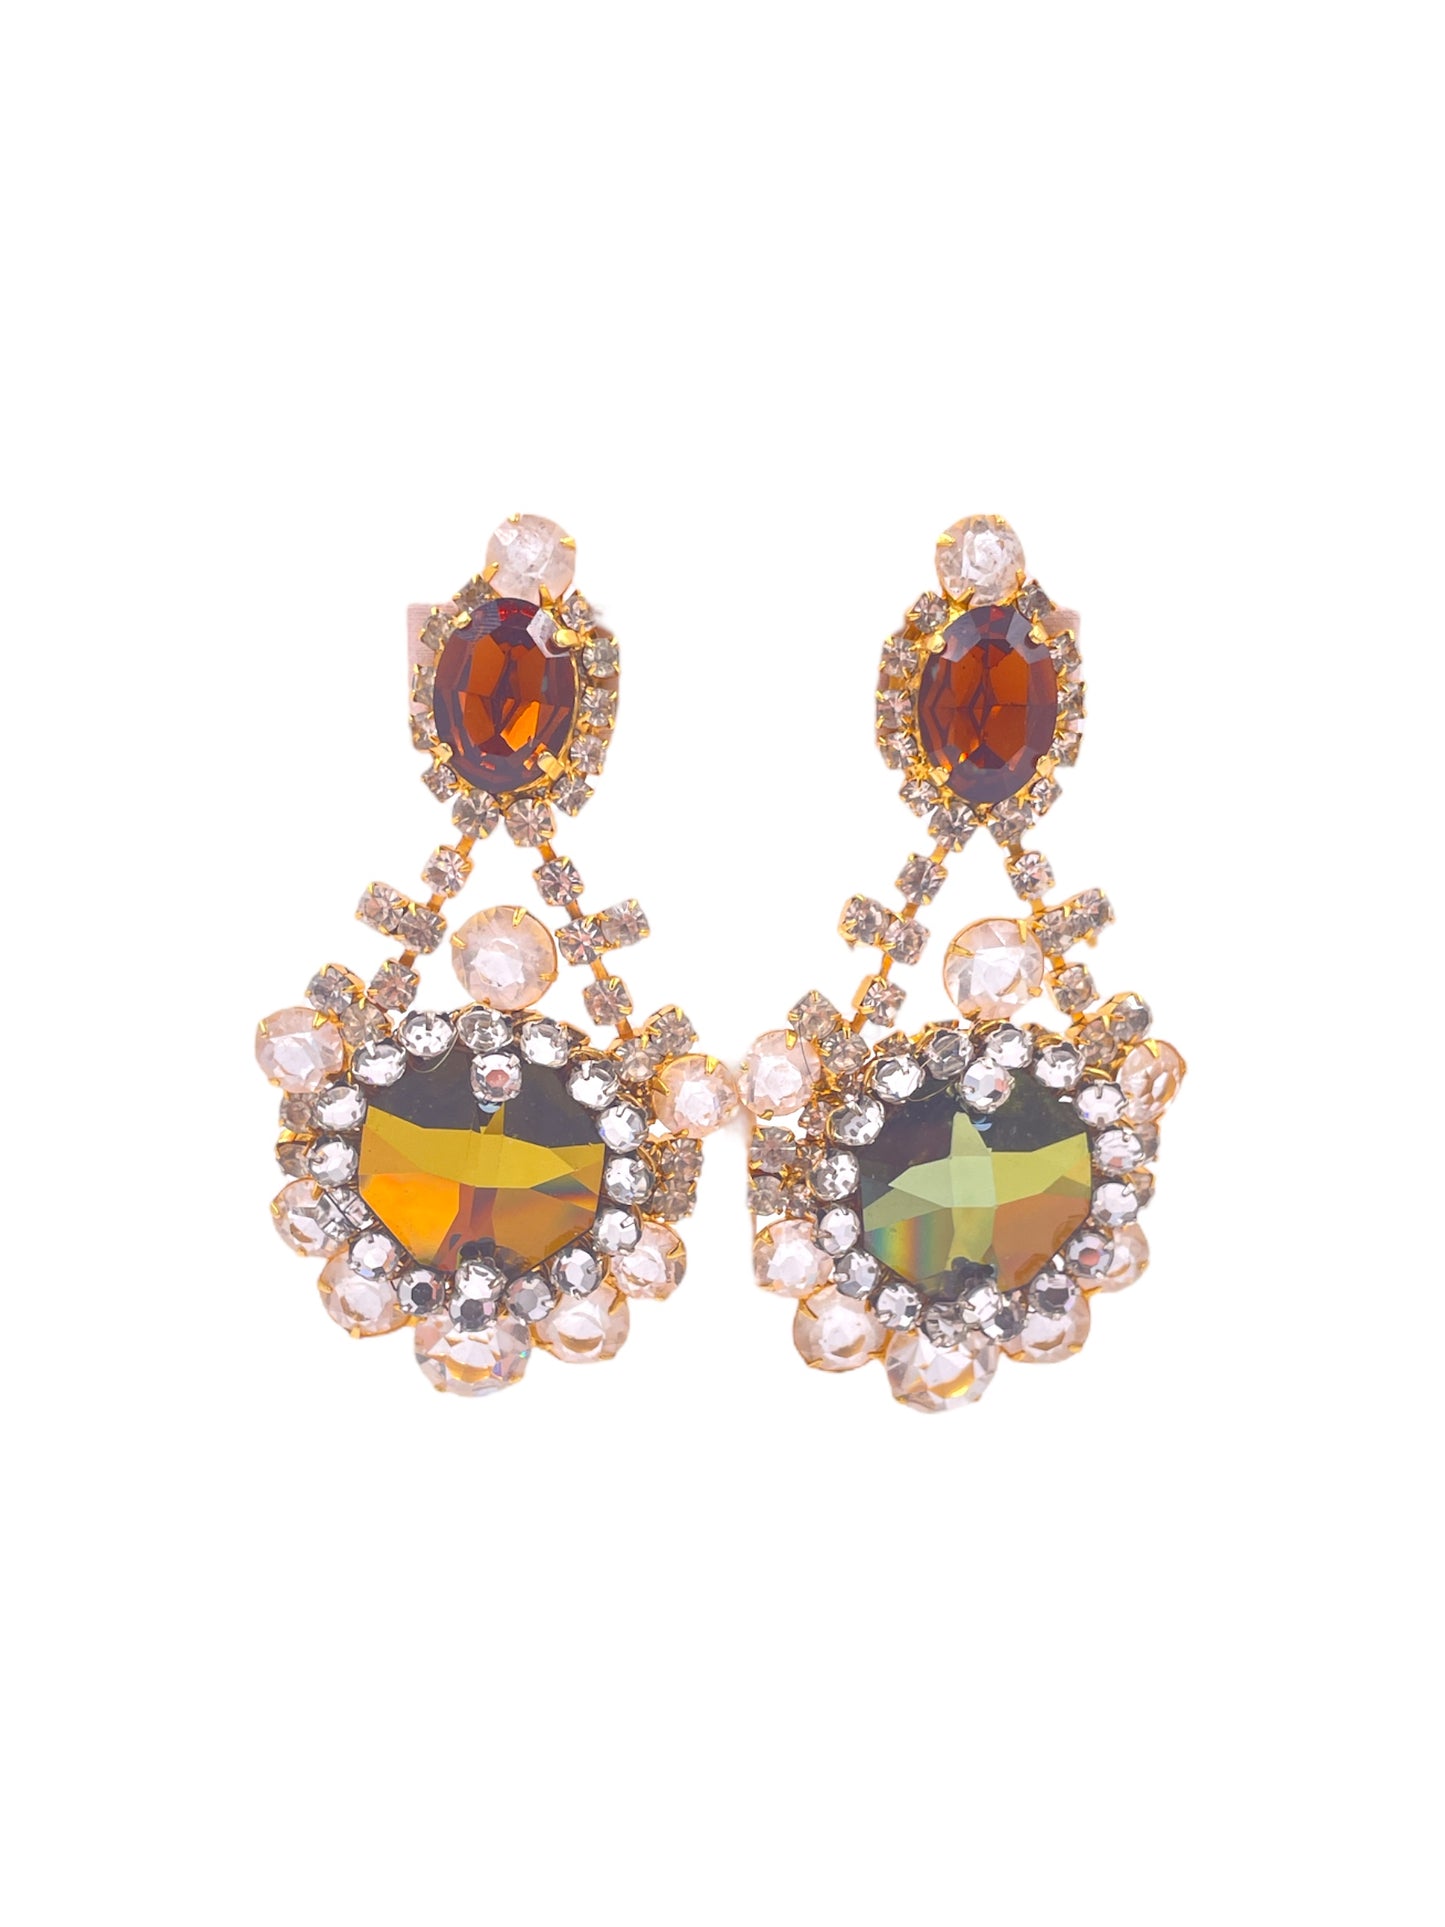 Lawrence Vrba Gold Large Crystal Earring